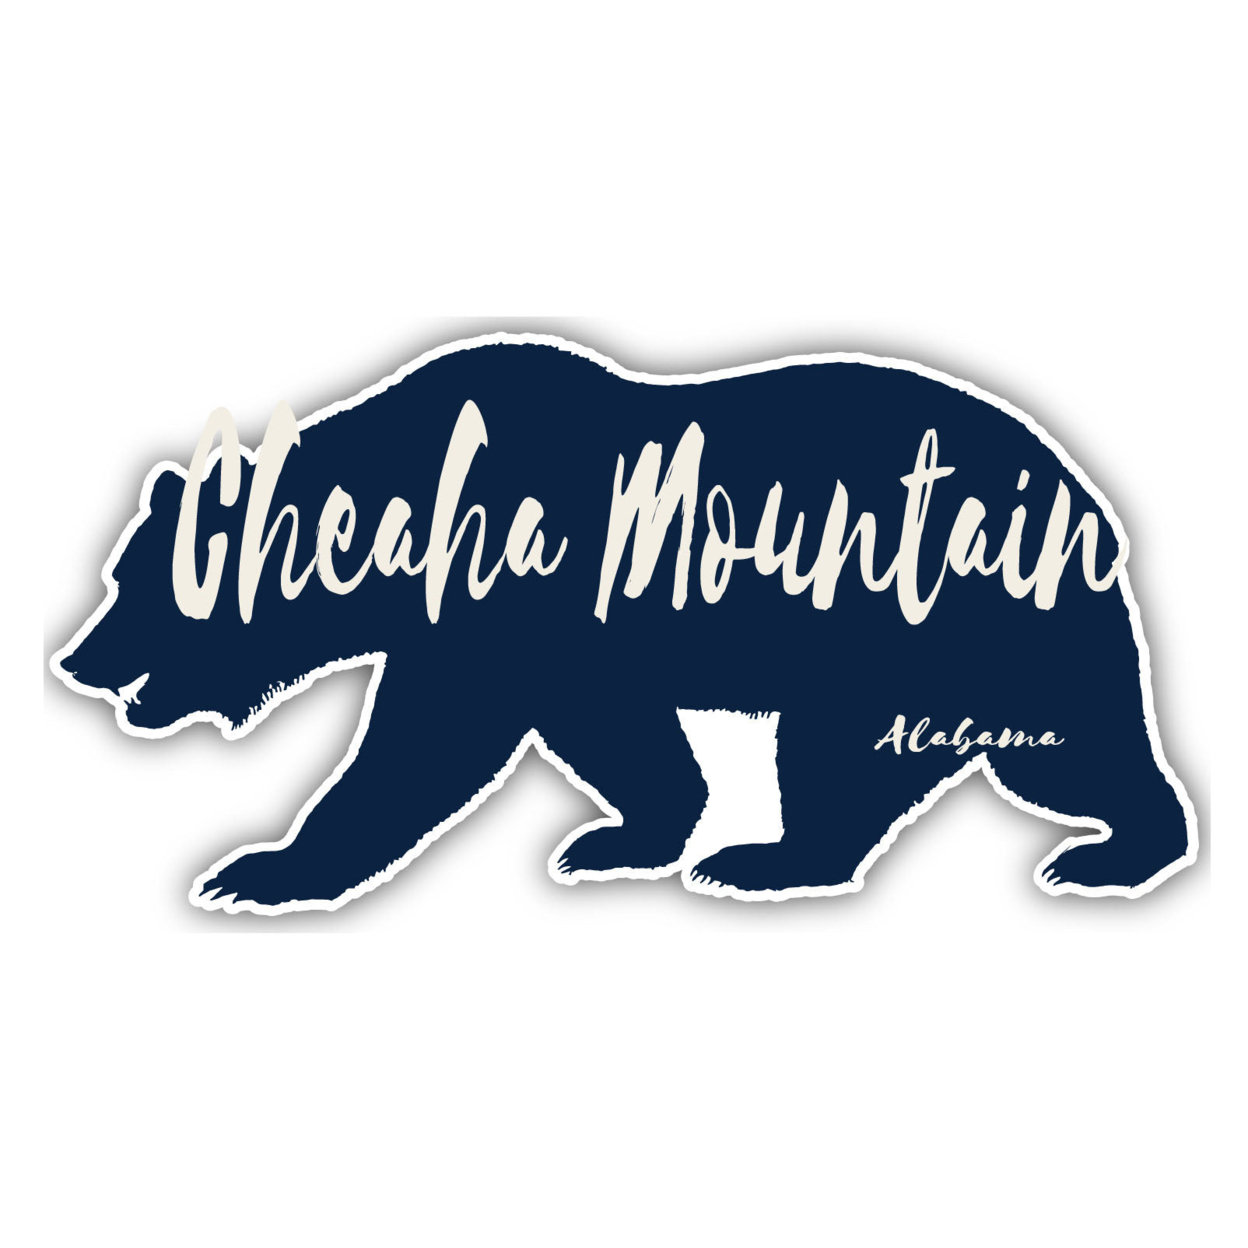 Cheaha Mountain Alabama Souvenir Decorative Stickers (Choose Theme And Size) - 4-Pack, 10-Inch, Tent